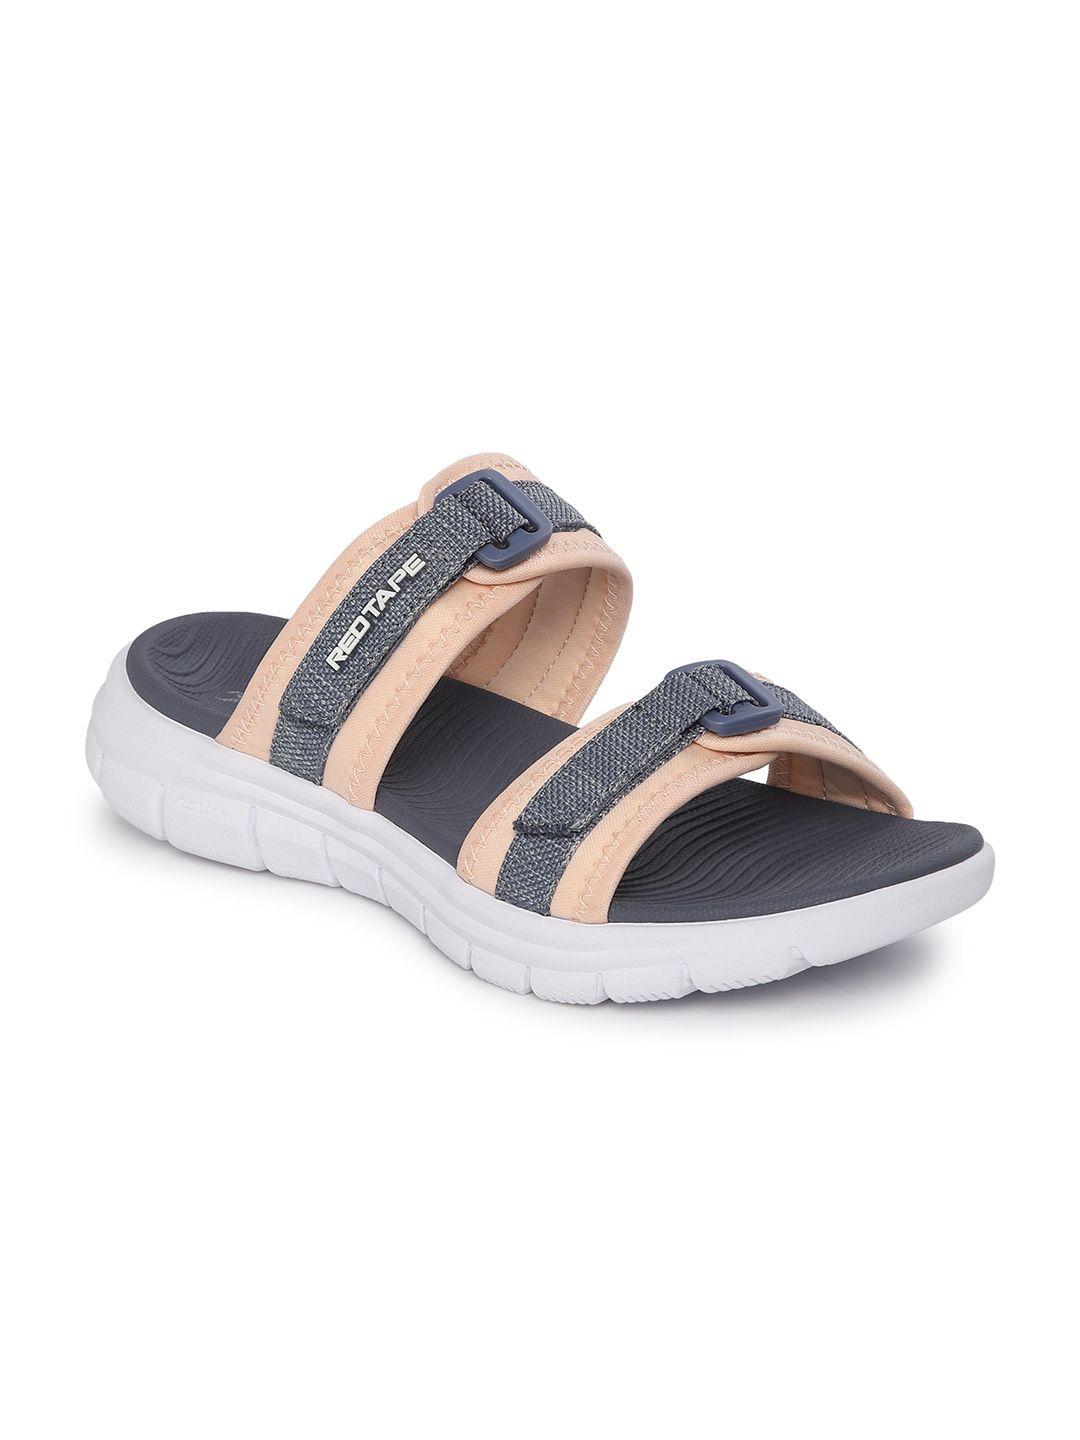 red tape women navy blue & peach-coloured colourblocked sports sandals